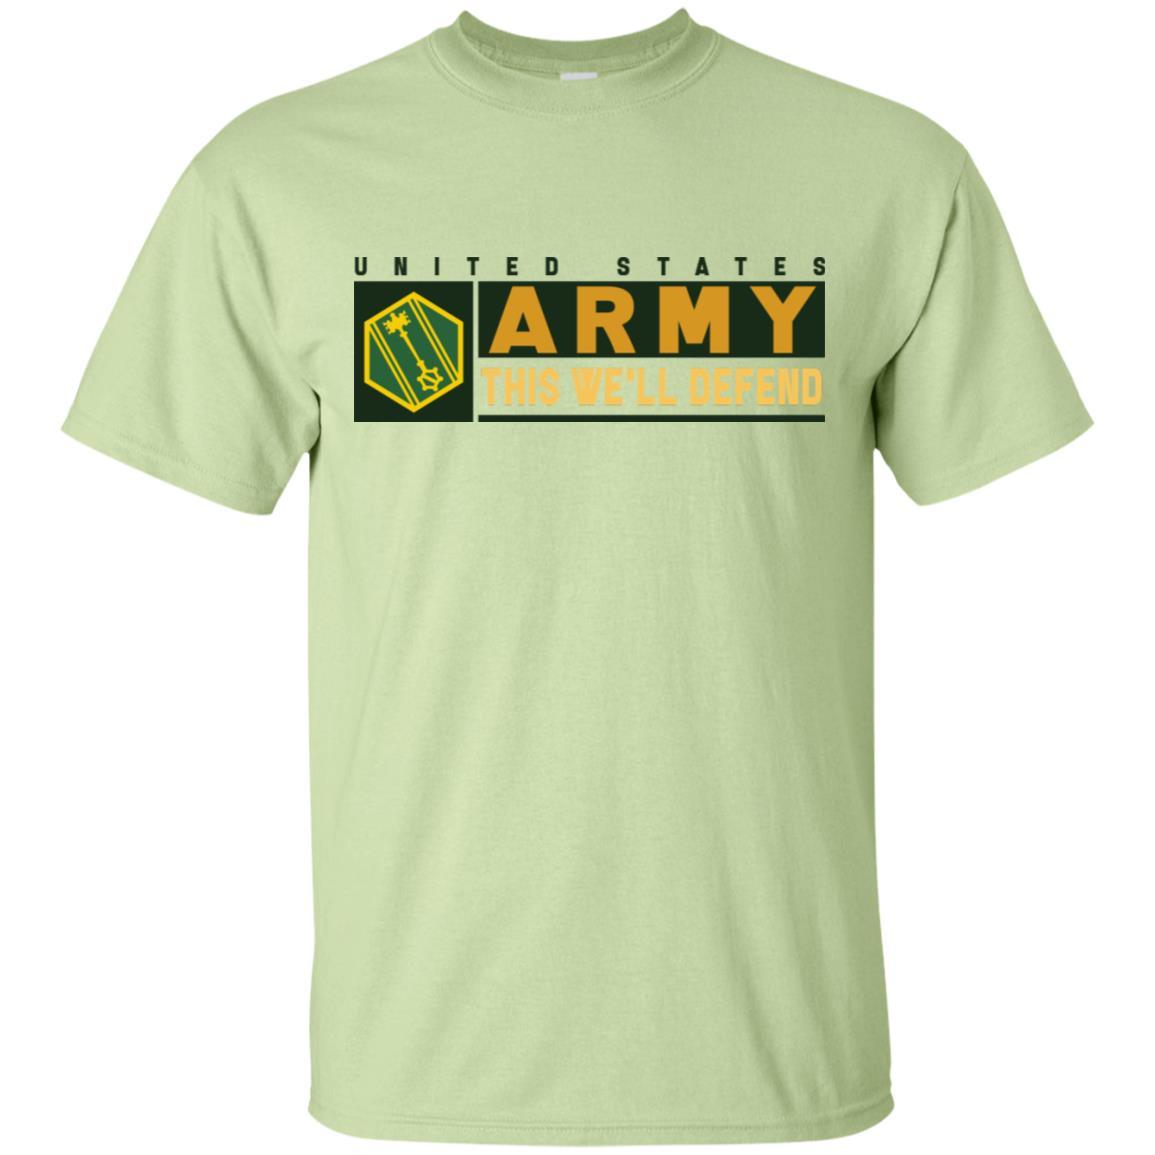 US Army 46TH MILITARY POLICE COMMAND- This We'll Defend T-Shirt On Front For Men-TShirt-Army-Veterans Nation